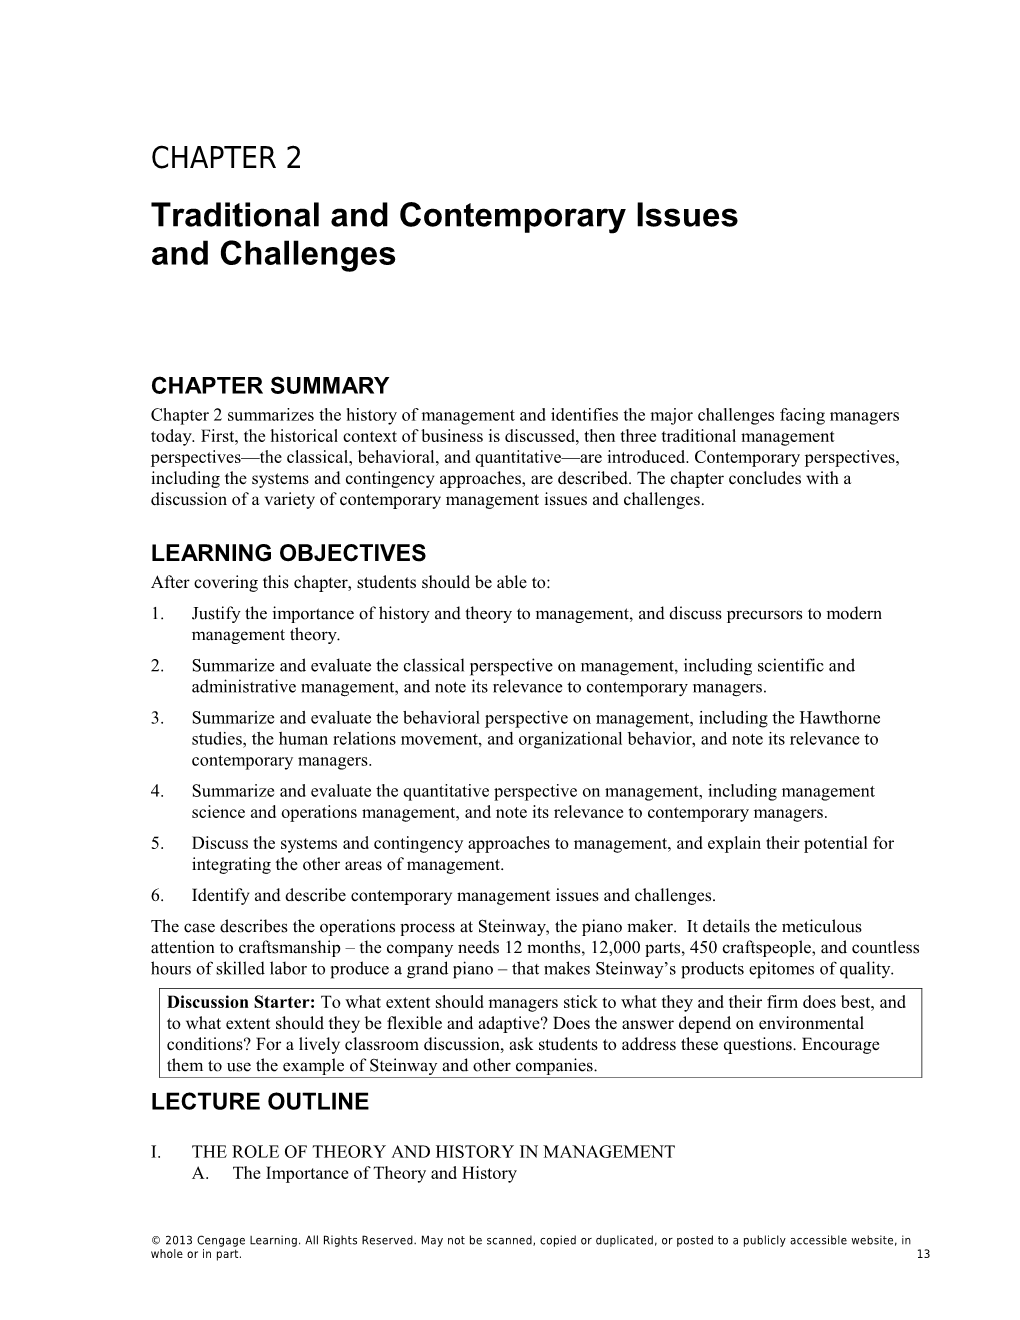 Chapter 2: Traditional and Contemporary Issues and Challenges